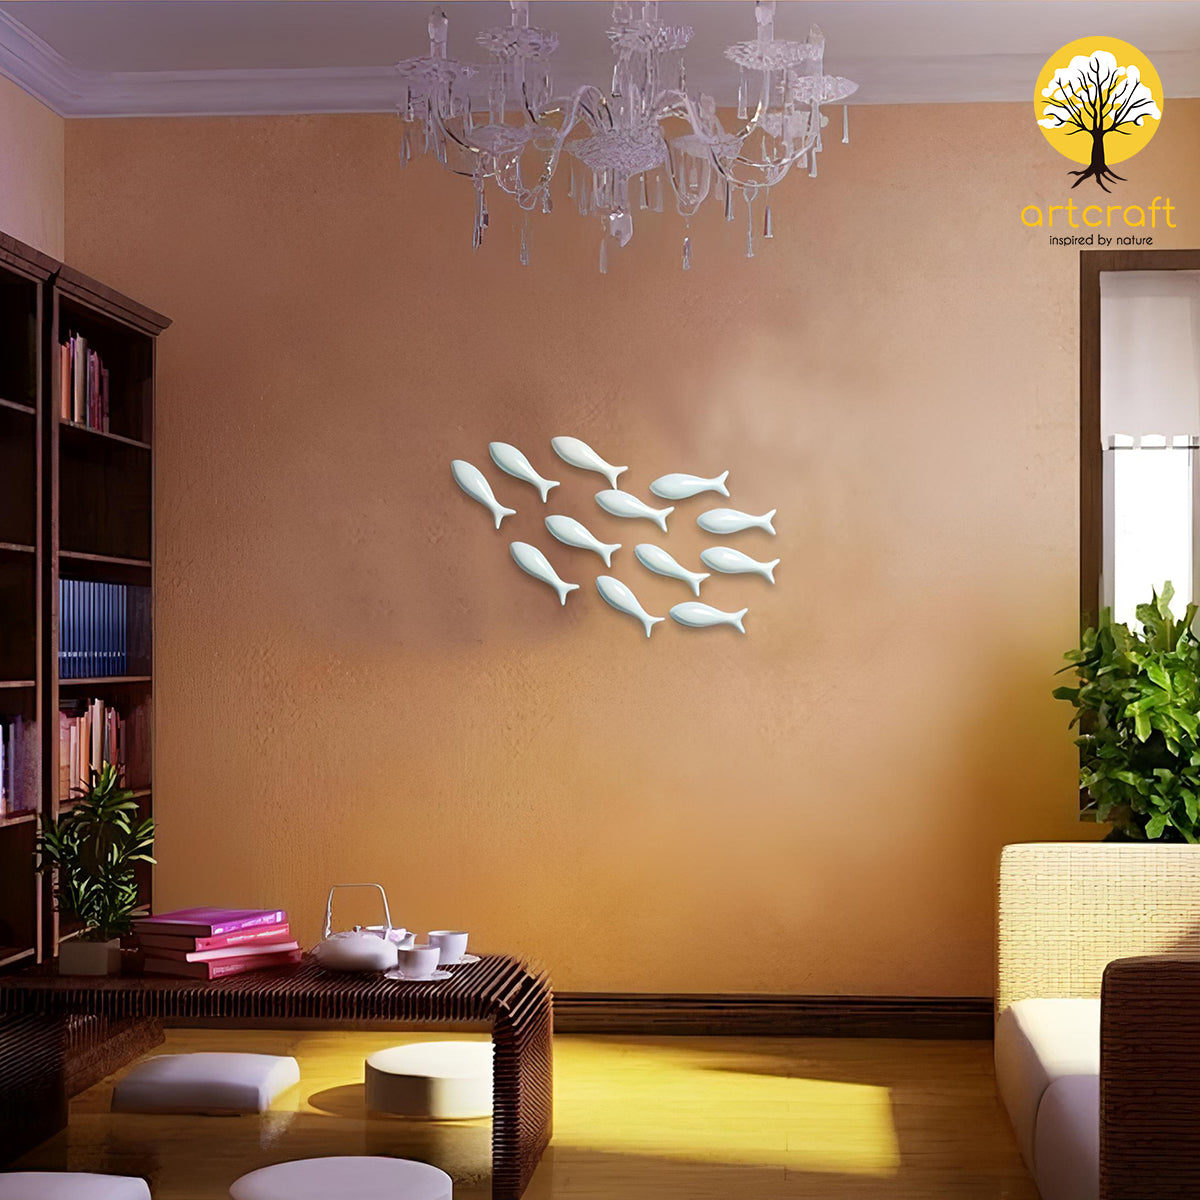 Guppy fish wall decor - 100% Made in Pure Brass